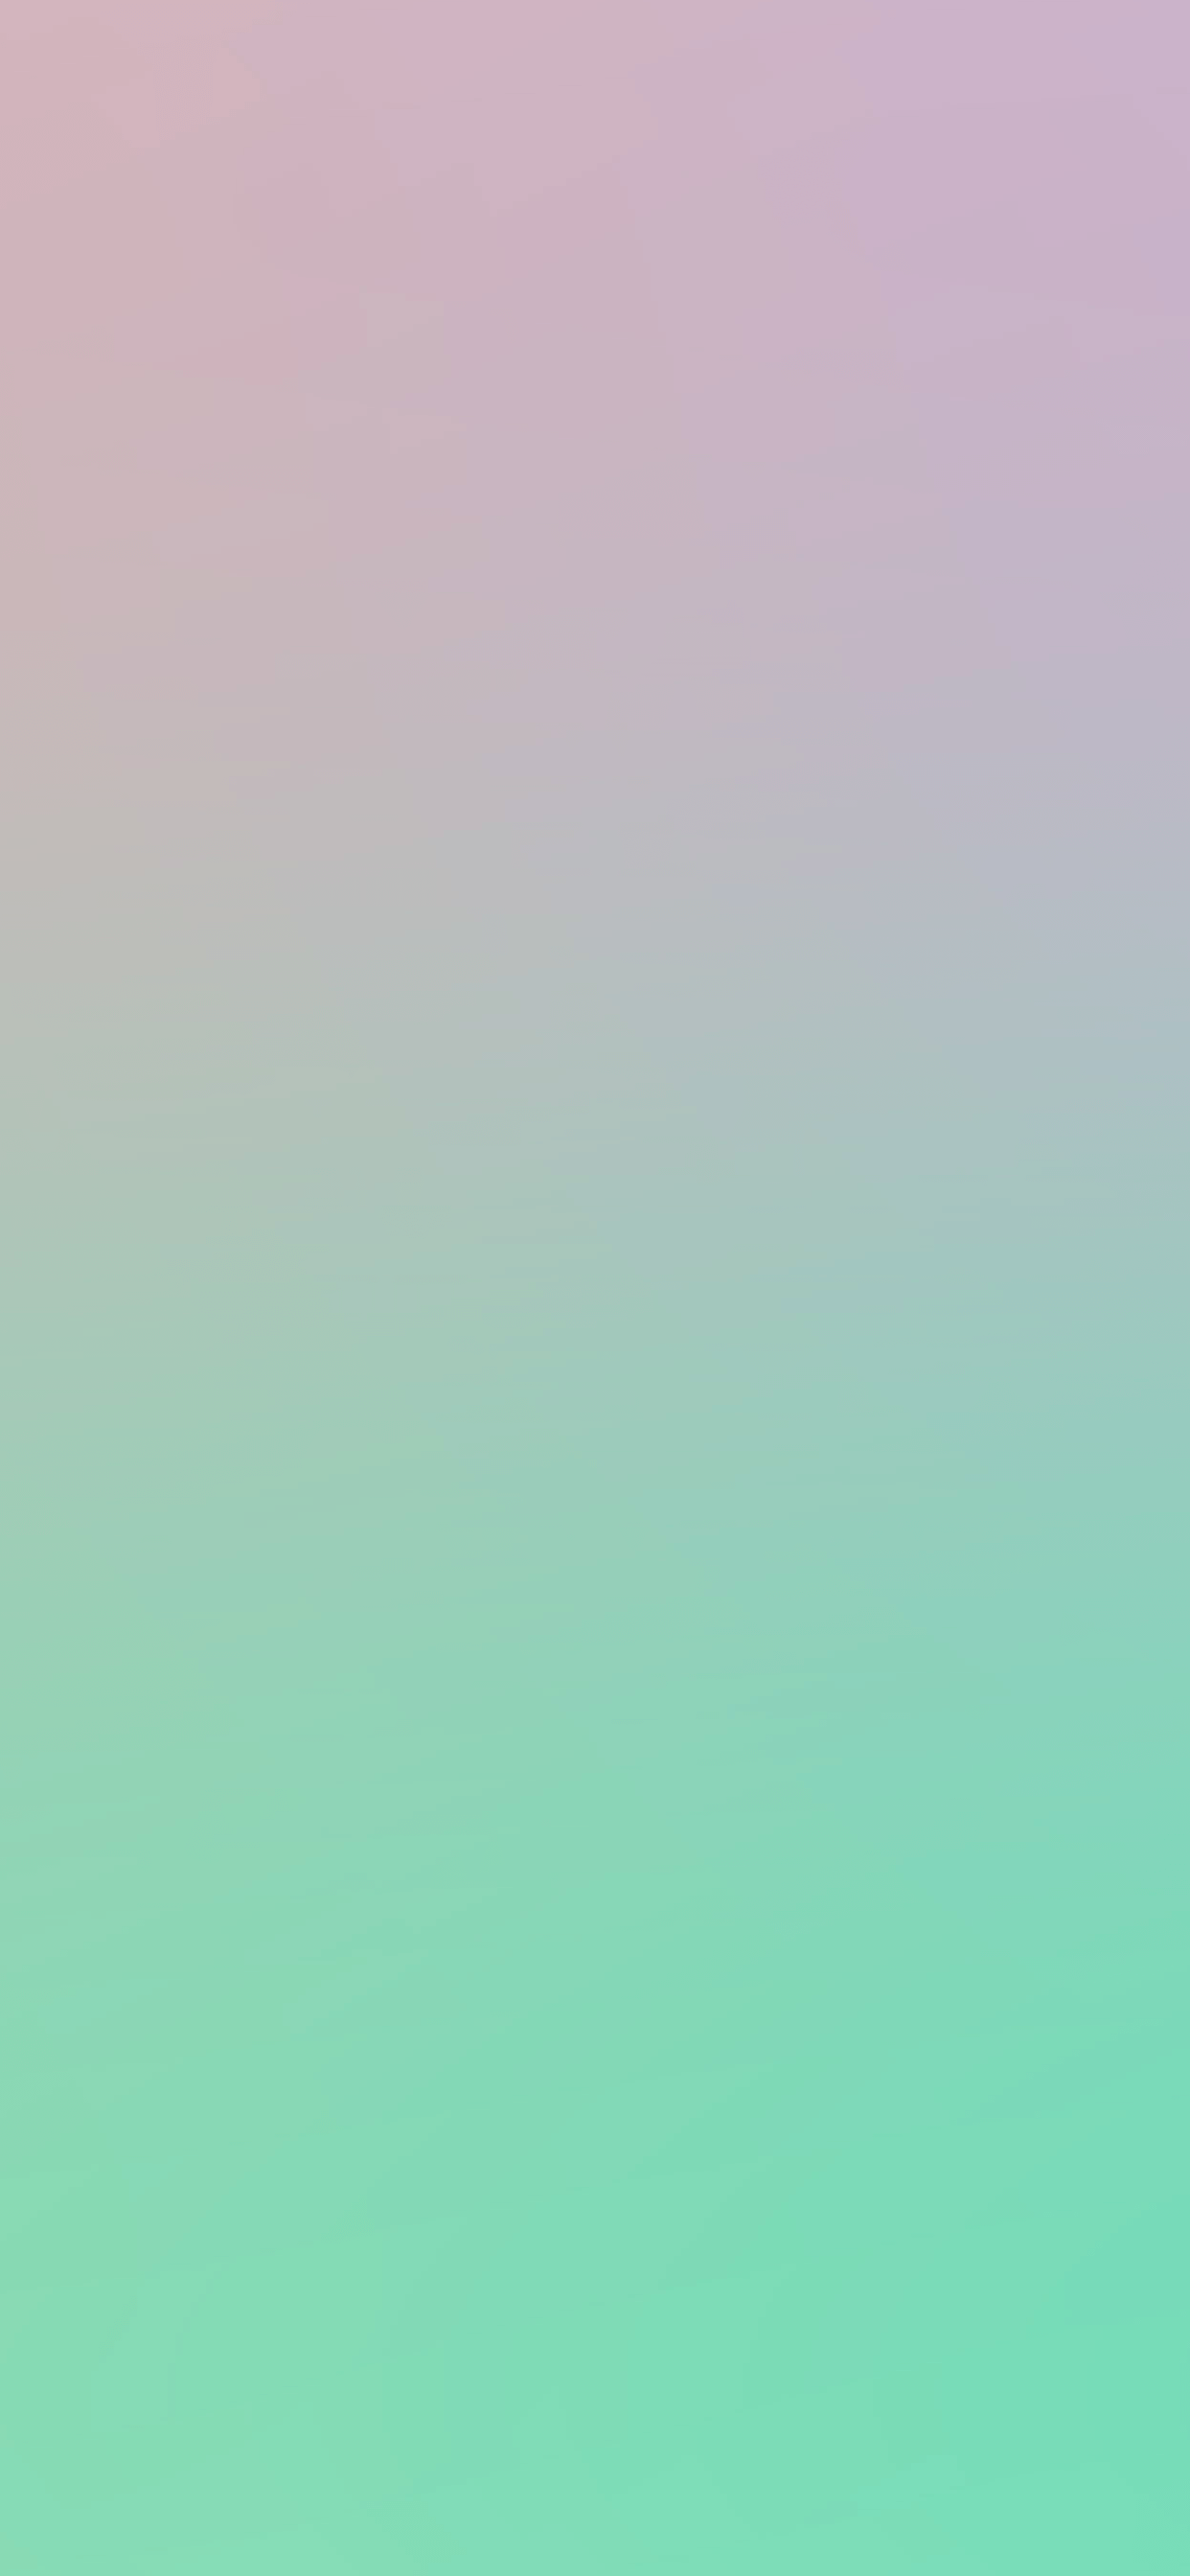 Mint Green Wallpaper For iPhone 11 Pro Max